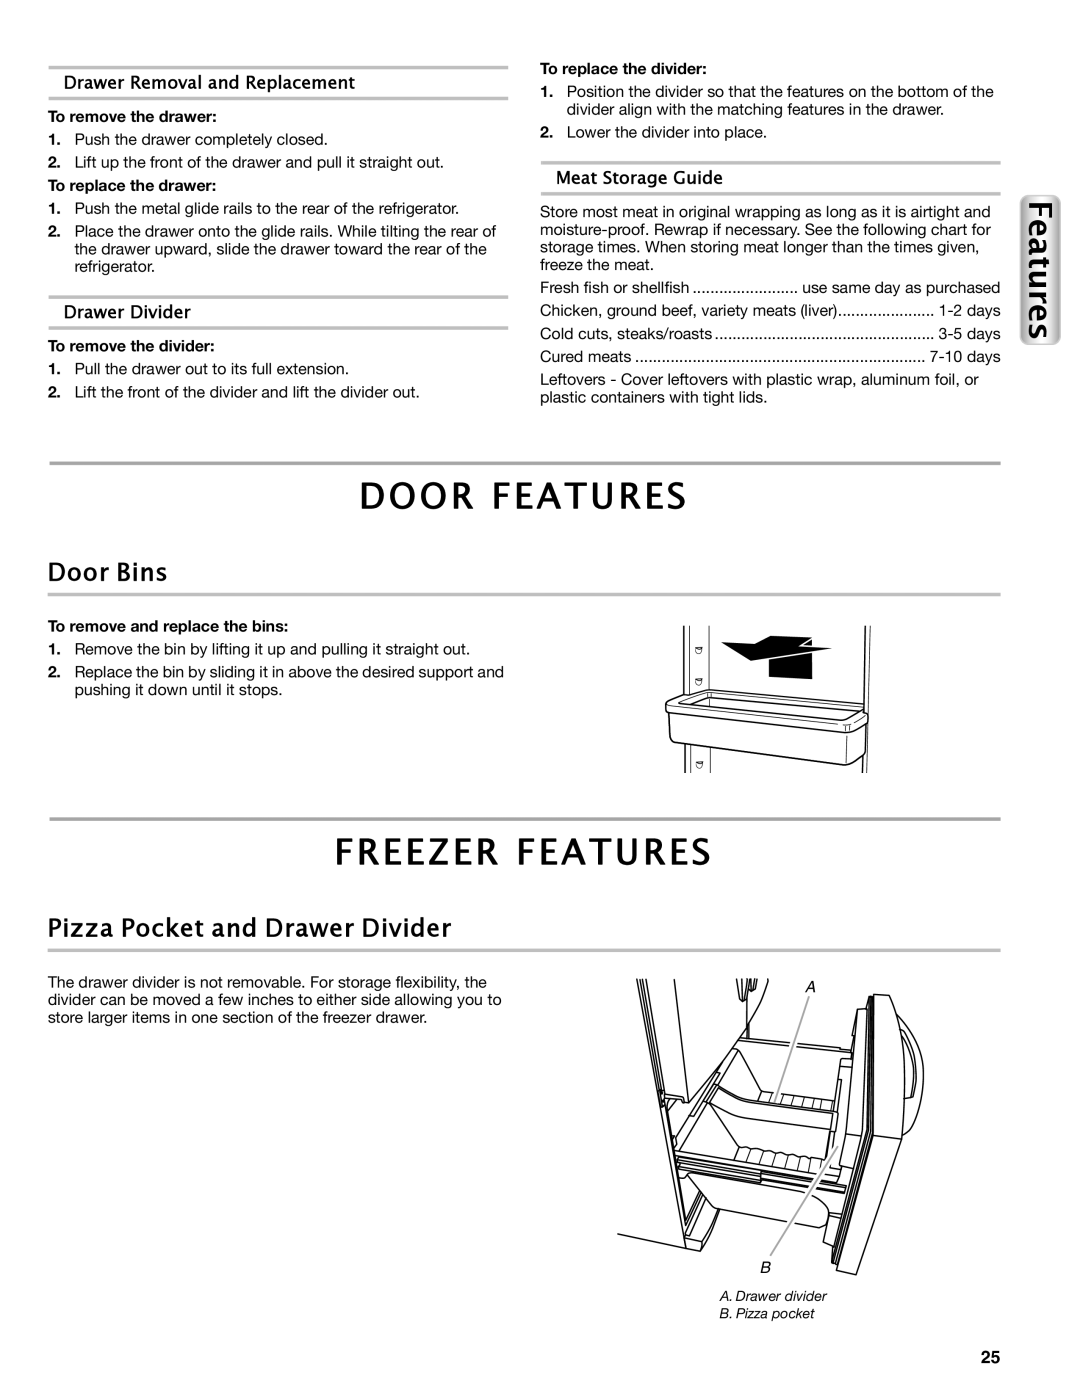 Maytag W10558104A manual Door Features, Freezer Features, Door Bins, Pizza Pocket and Drawer Divider, Meat Storage Guide 